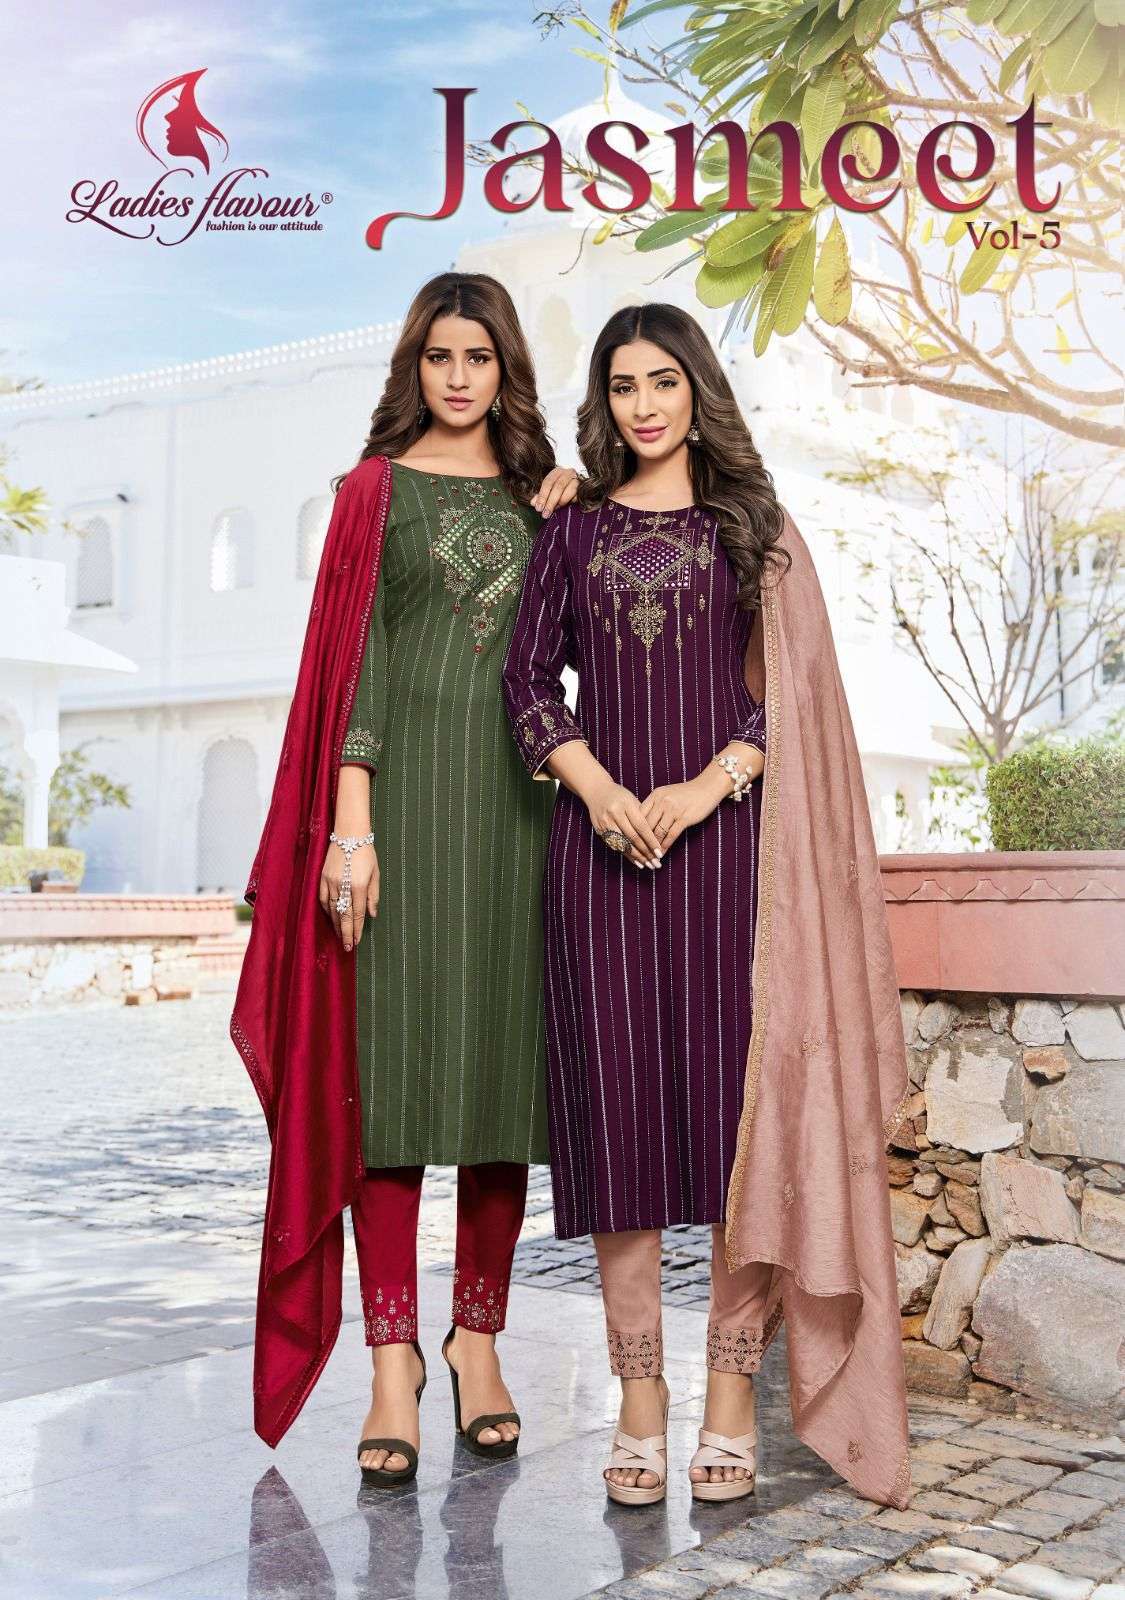 Ladies flavour presents Jasmeet vol-5 Rayon Weaving exclusive designer kurtis with pant and dupatta collection 